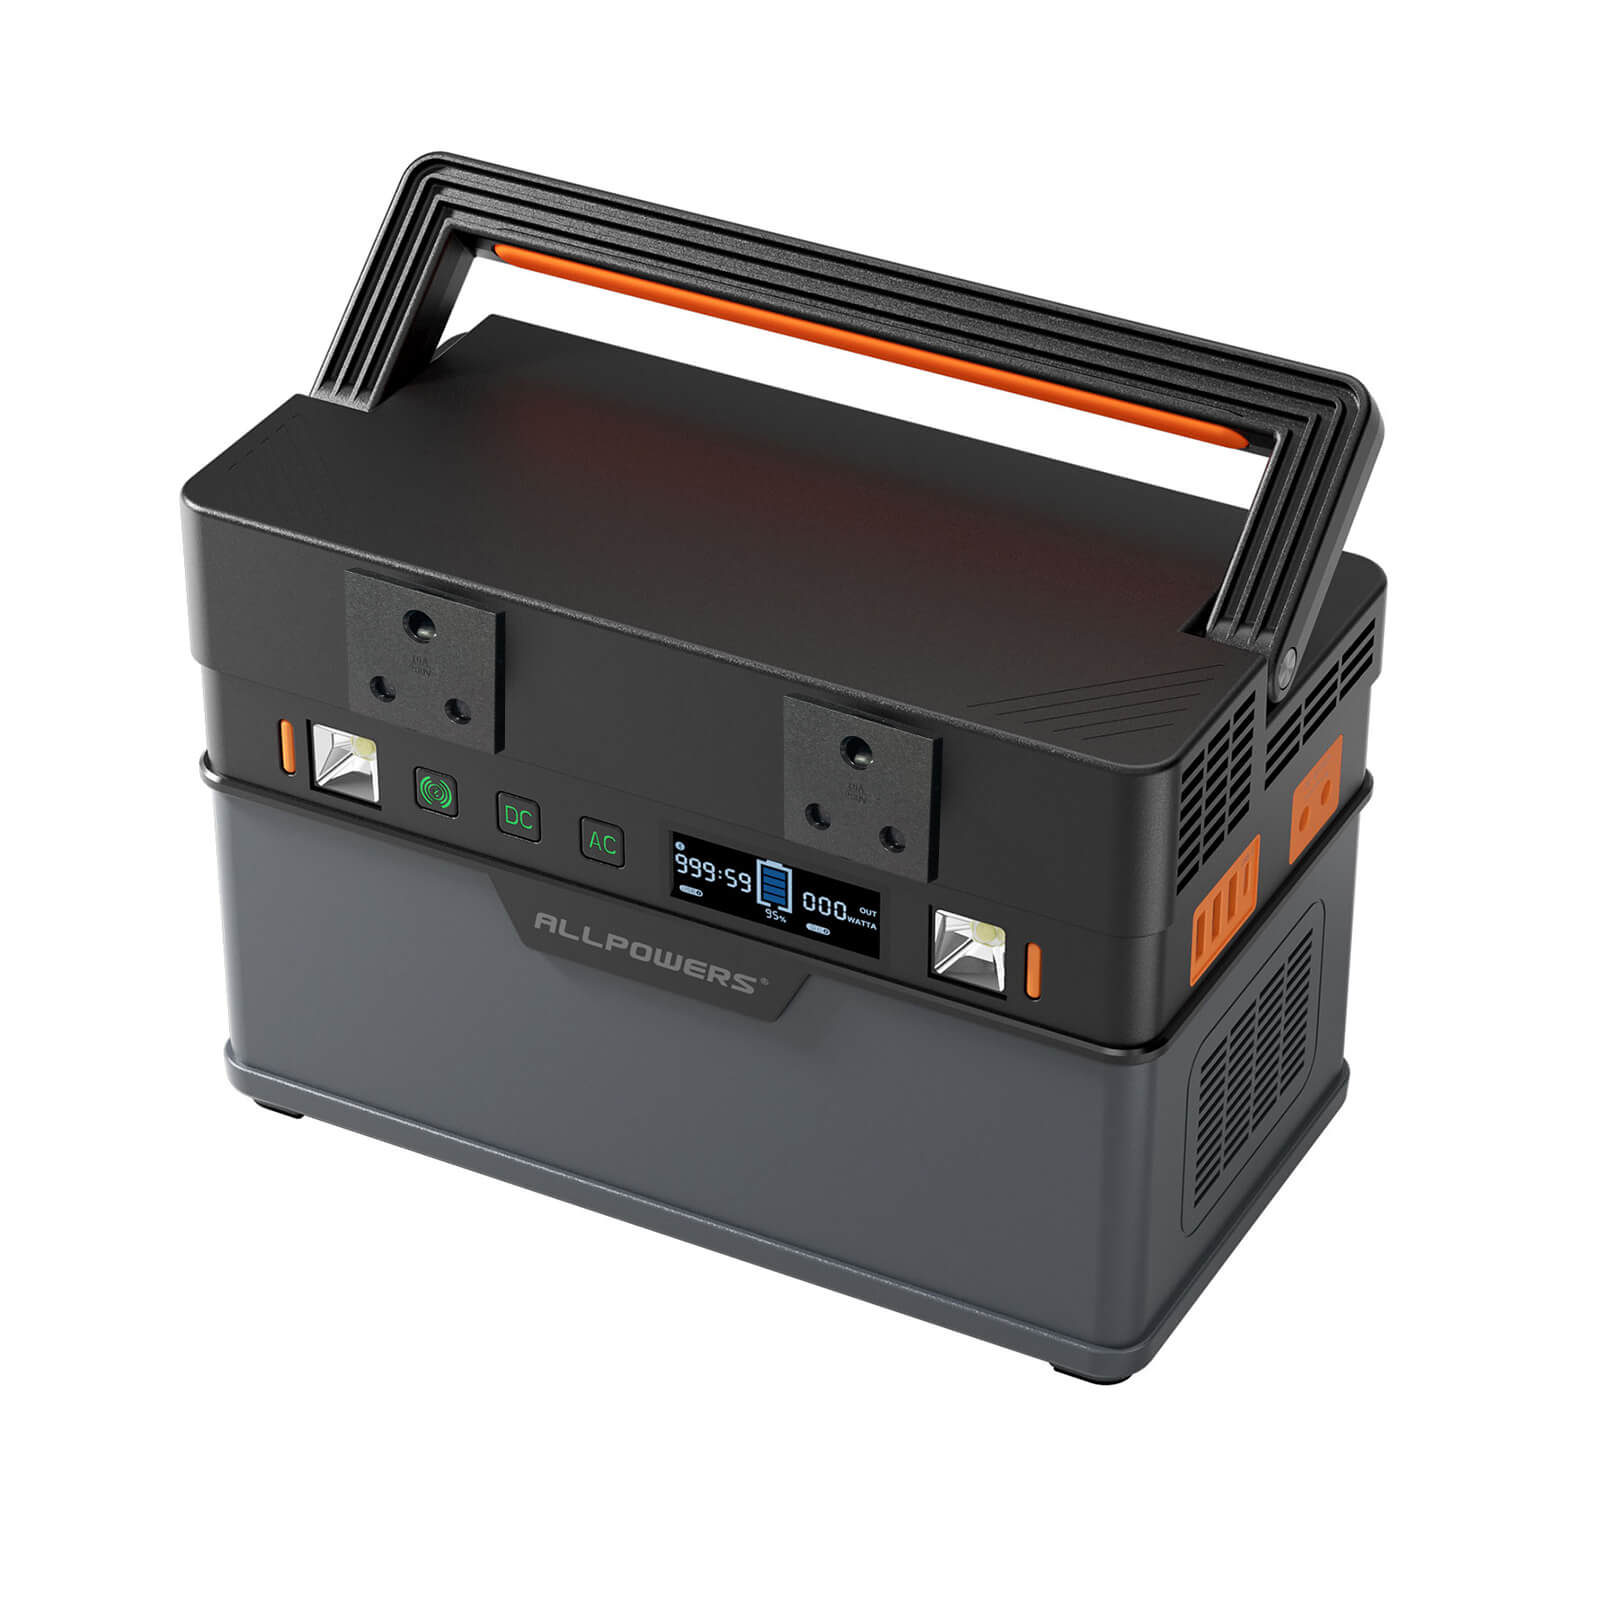 ALLPOWERS S700 Portable Power Station 700W 606Wh